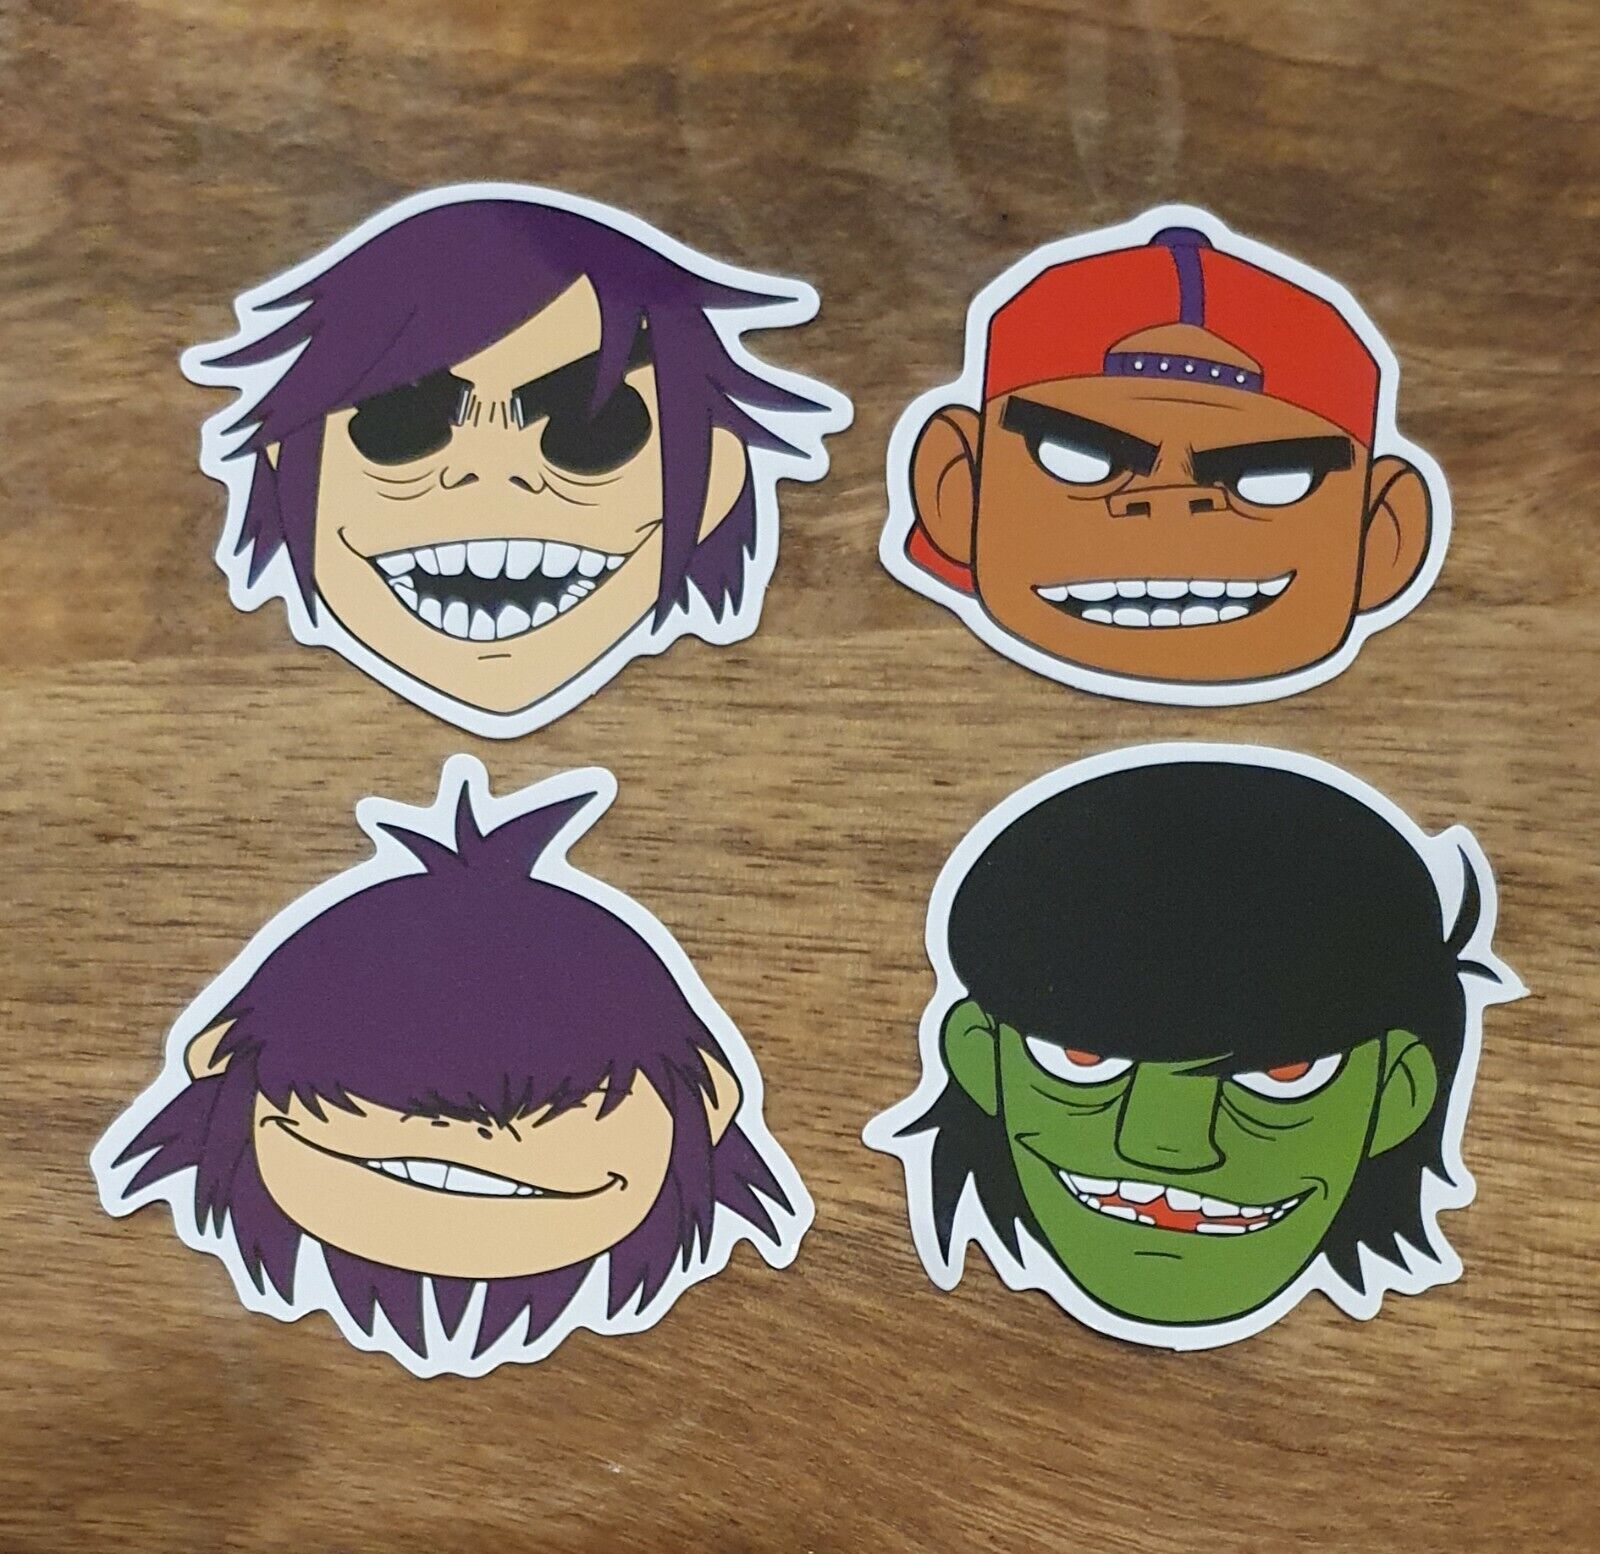 Gorillaz style sticker PACK OF 4 laptop Bumper Decal Band Rock